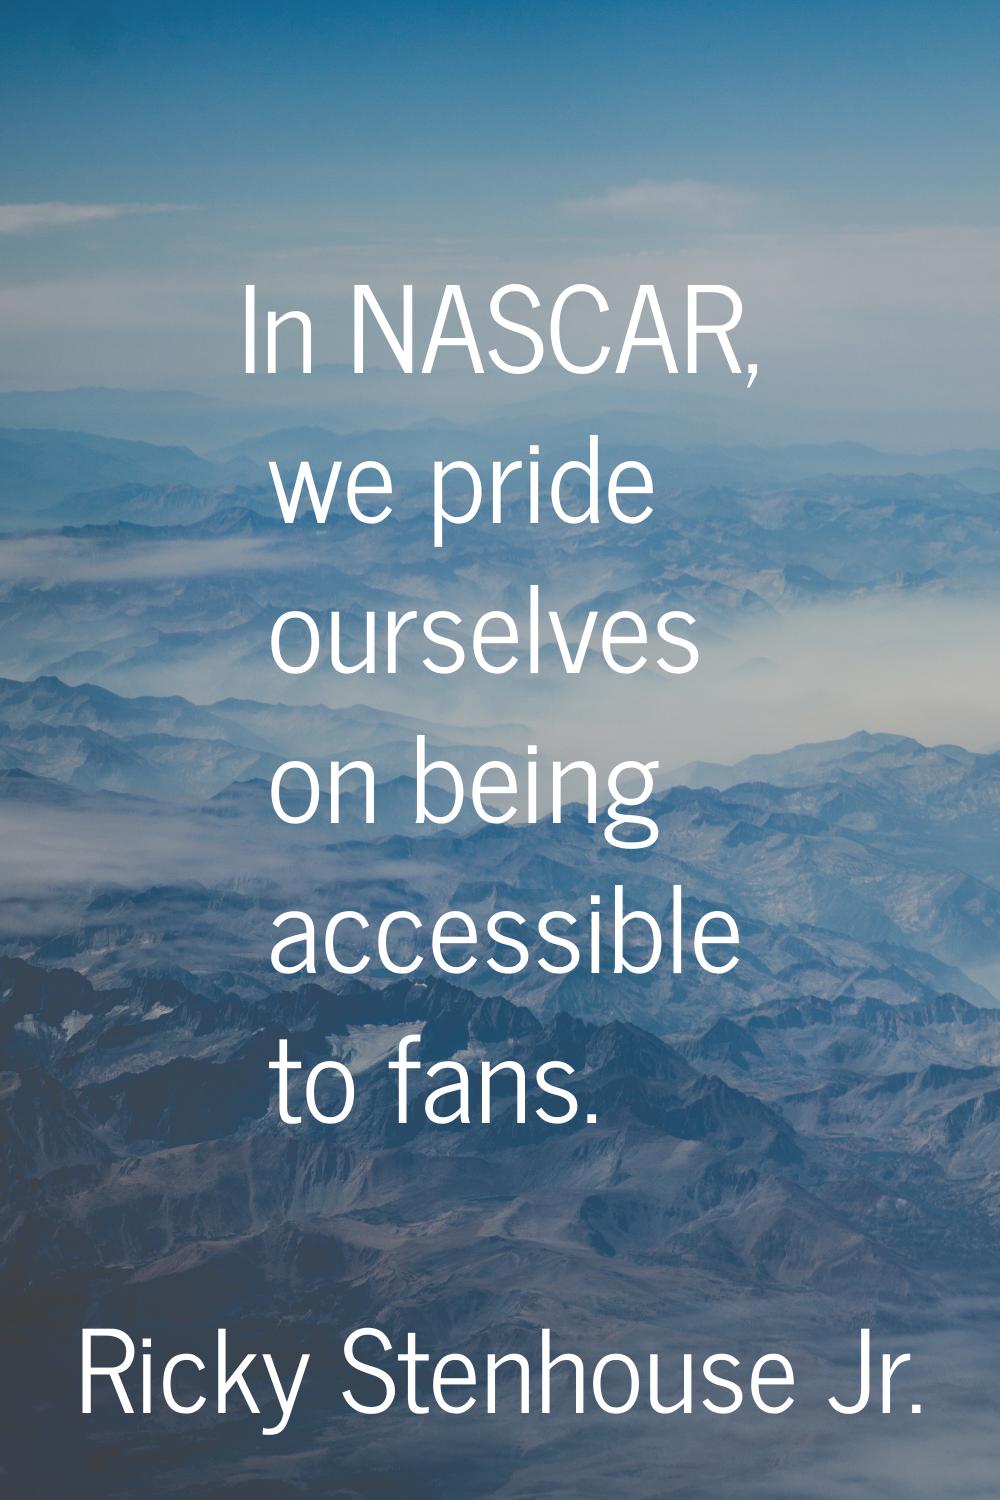 In NASCAR, we pride ourselves on being accessible to fans.